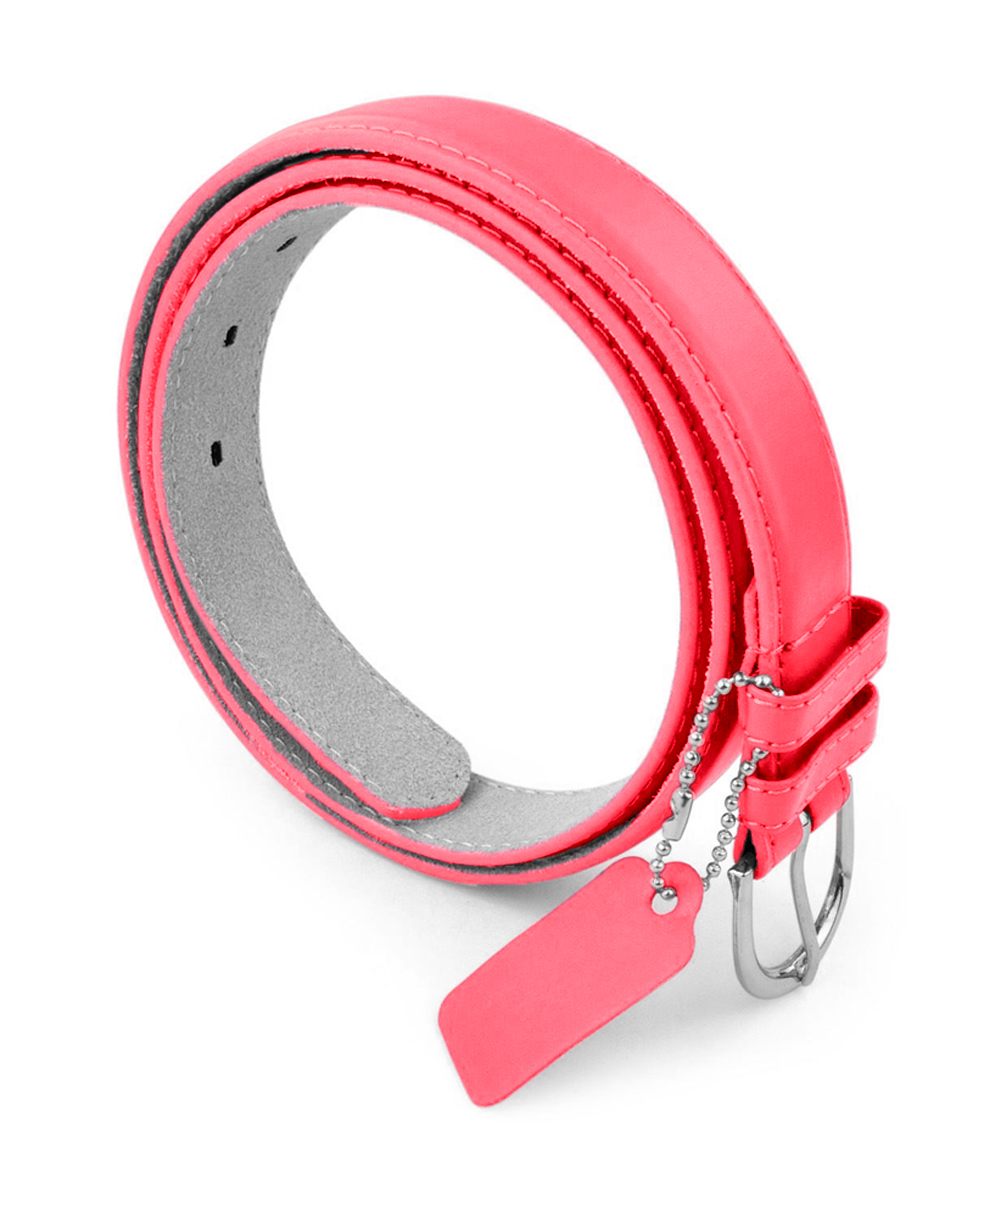 Womens Chic Dress Belt Bonded Leather Polished Buckle - Watermelon Small